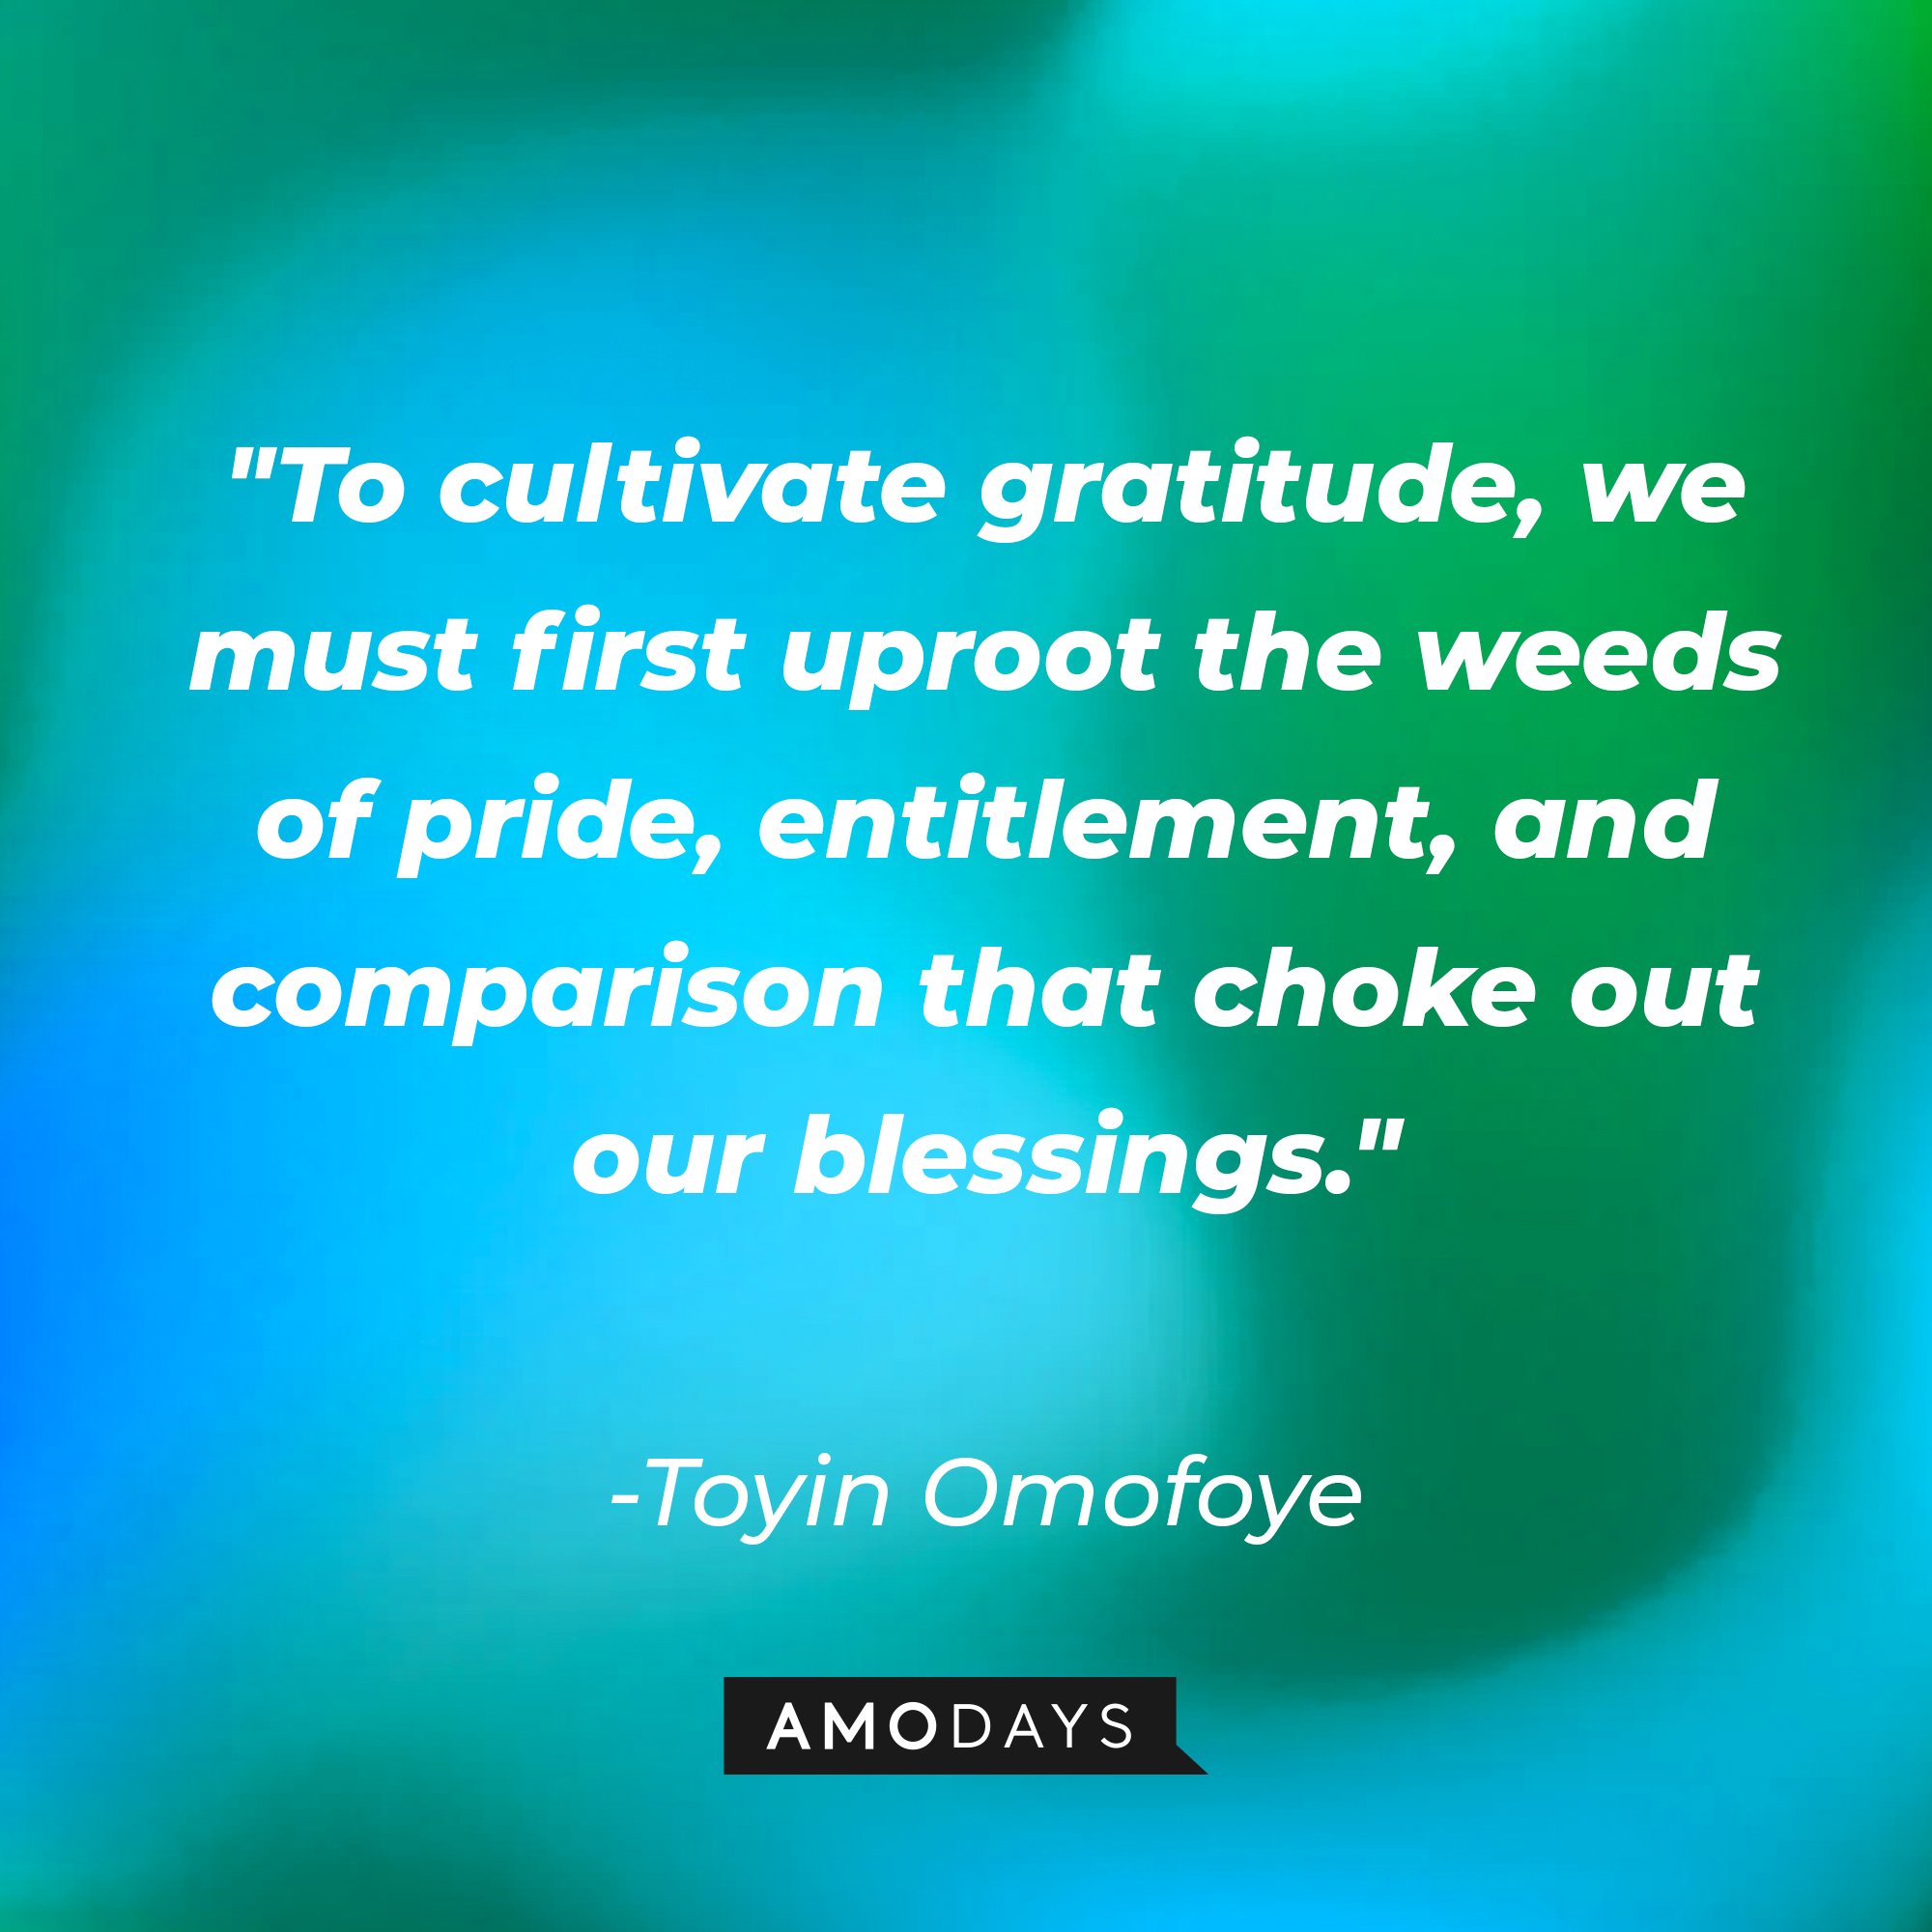 Toyin Omofoye’s quote: "To cultivate gratitude, we must first uproot the weeds of pride, entitlement, and comparison that choke out our blessings." | Image: AmoDays